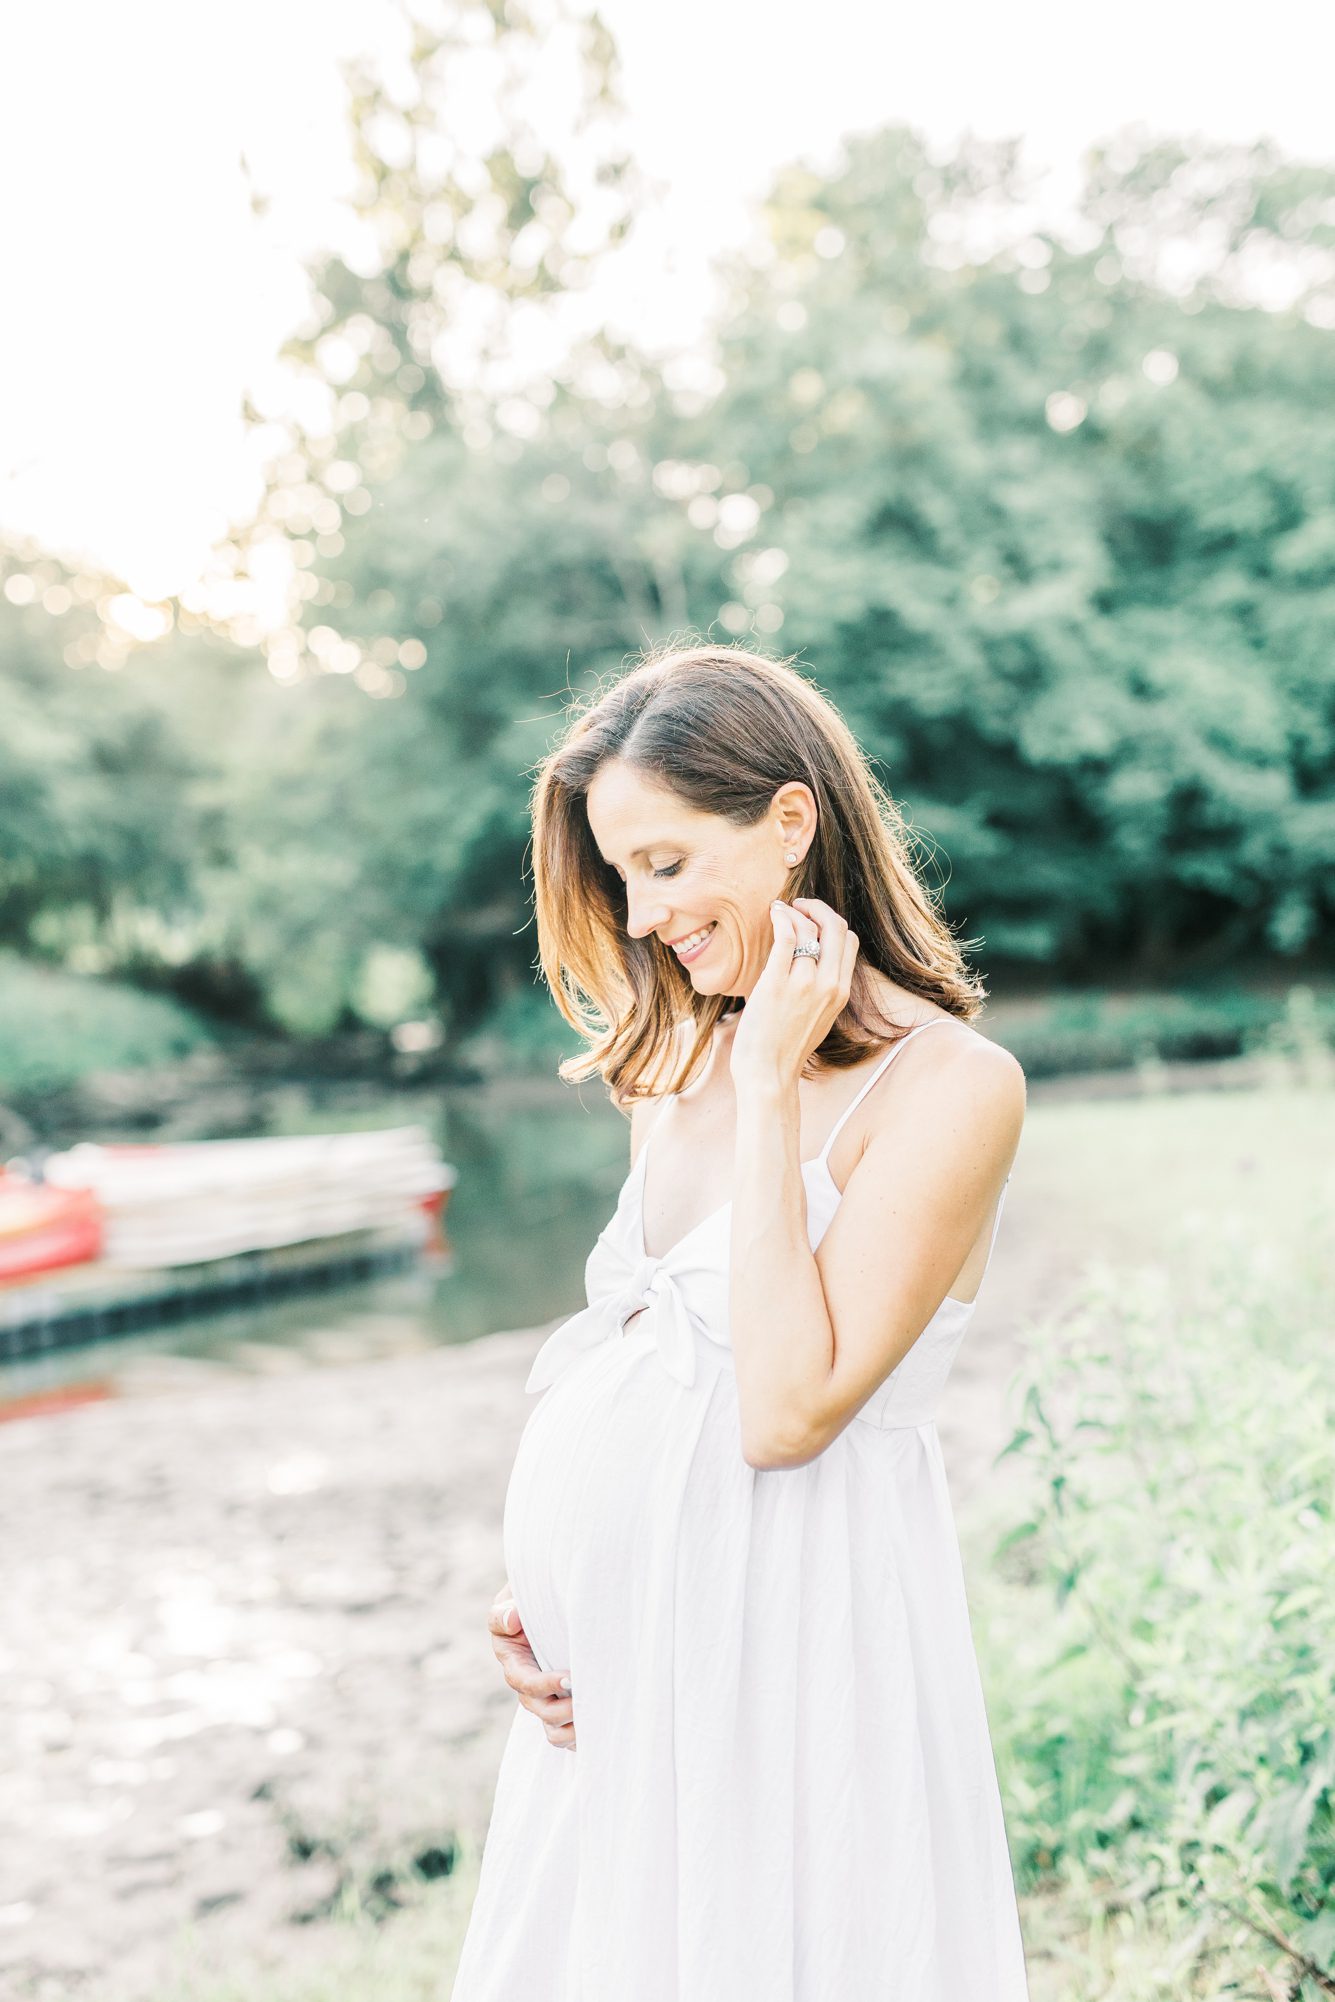 Mom smiling at baby bump during Washington DC maternity session. Photo by LRG Portraits.